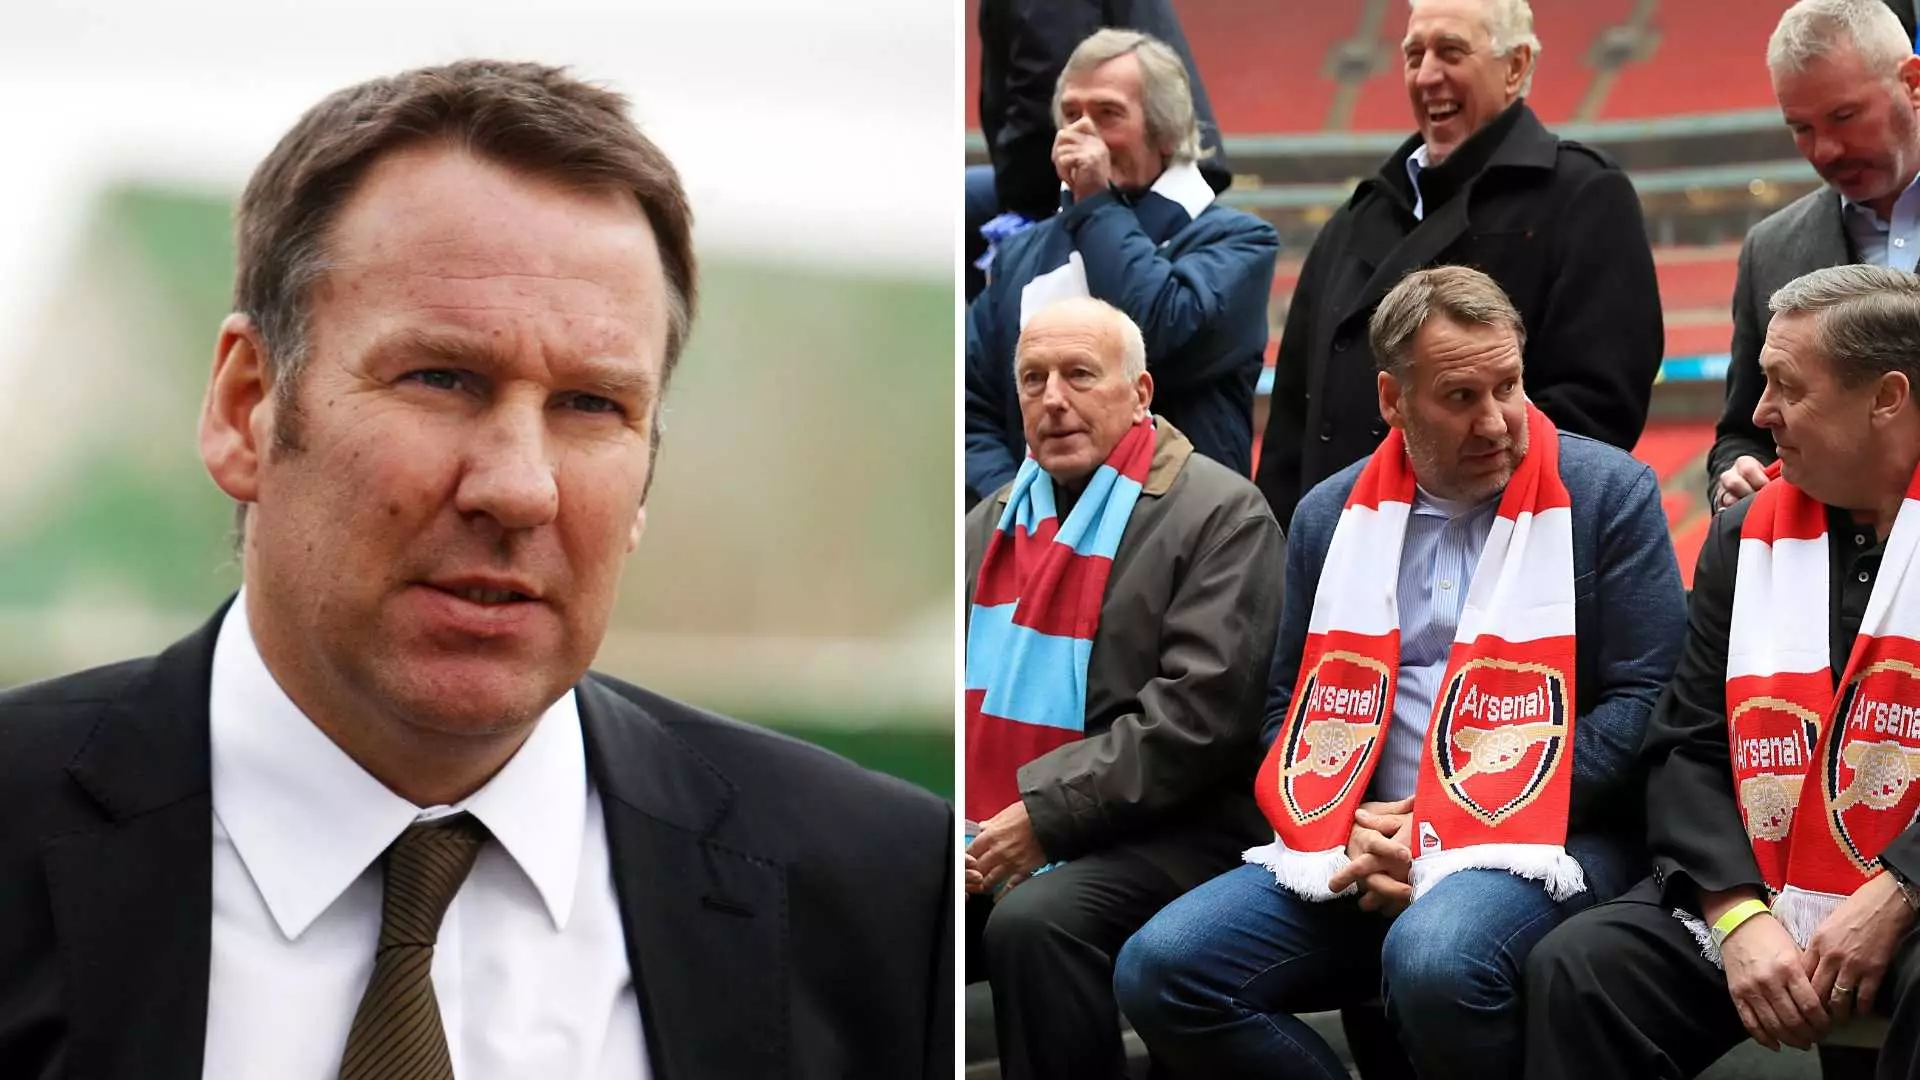 Arsenal Fans Relentlessly Rip Into Paul Merson After His Comments About The Gunners